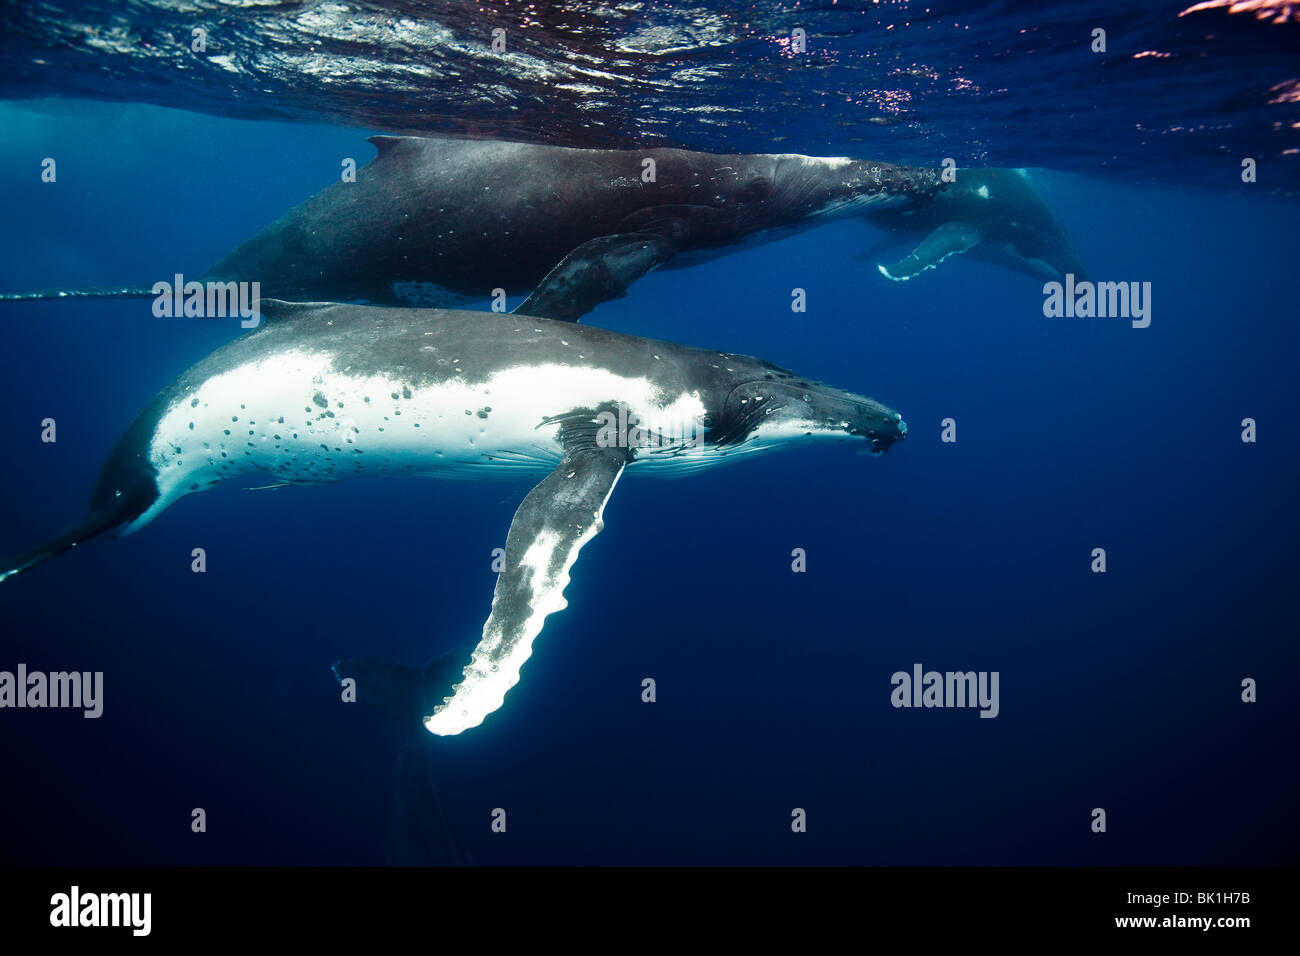 Underwater view of Humpback whales (Megaptera novaeangliae). Stock Photo